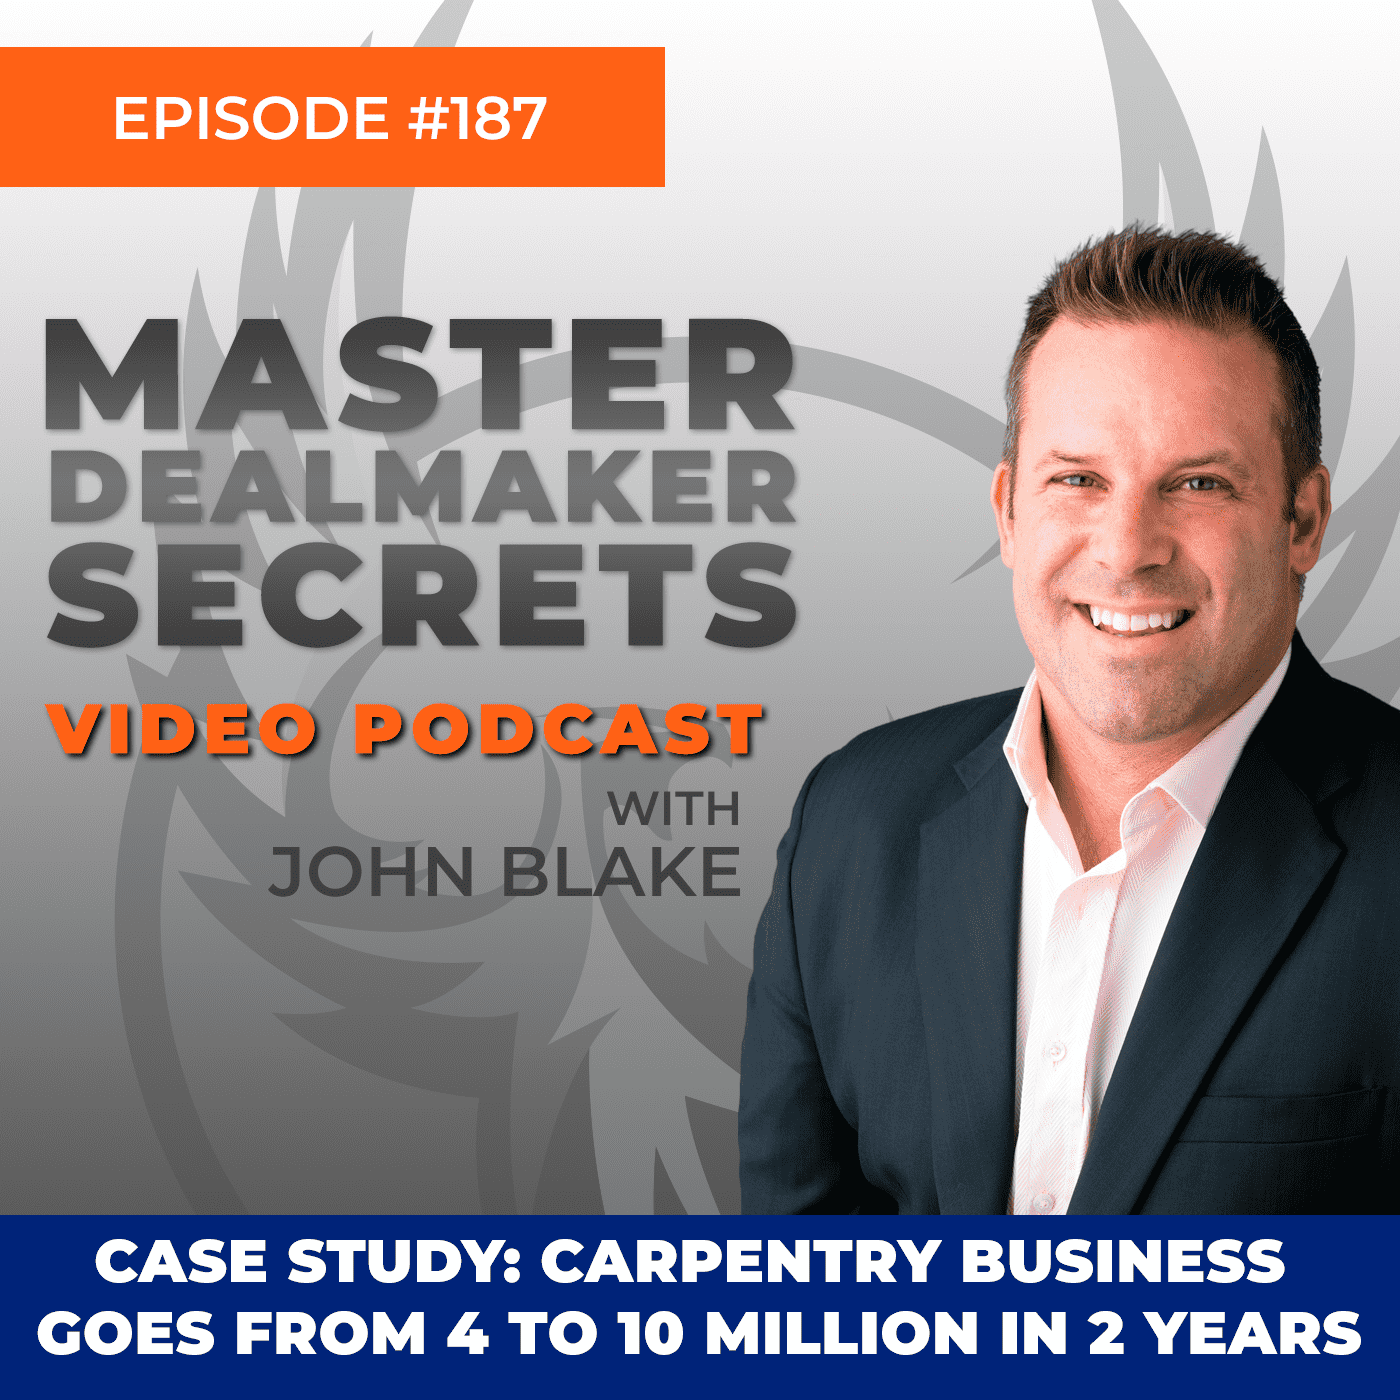 John Blake Case Study Carpentry Business Goes From 4 to 10 Million in 2 Years